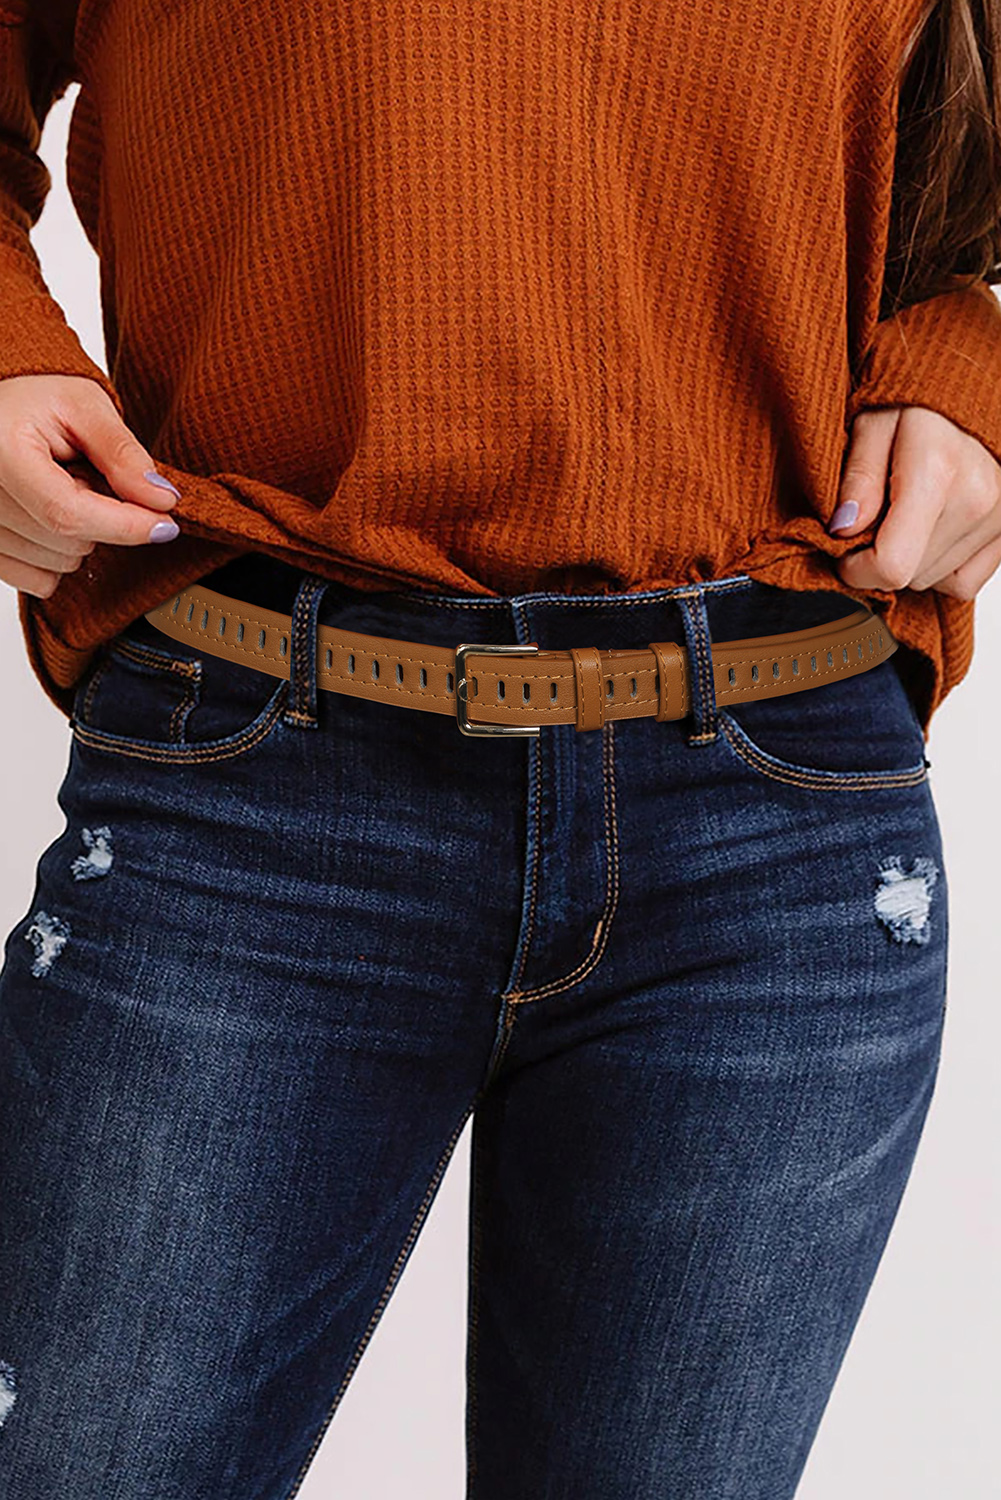 New arrivals 2023 Brown Cutout Faux LEATHER Buckled BELT